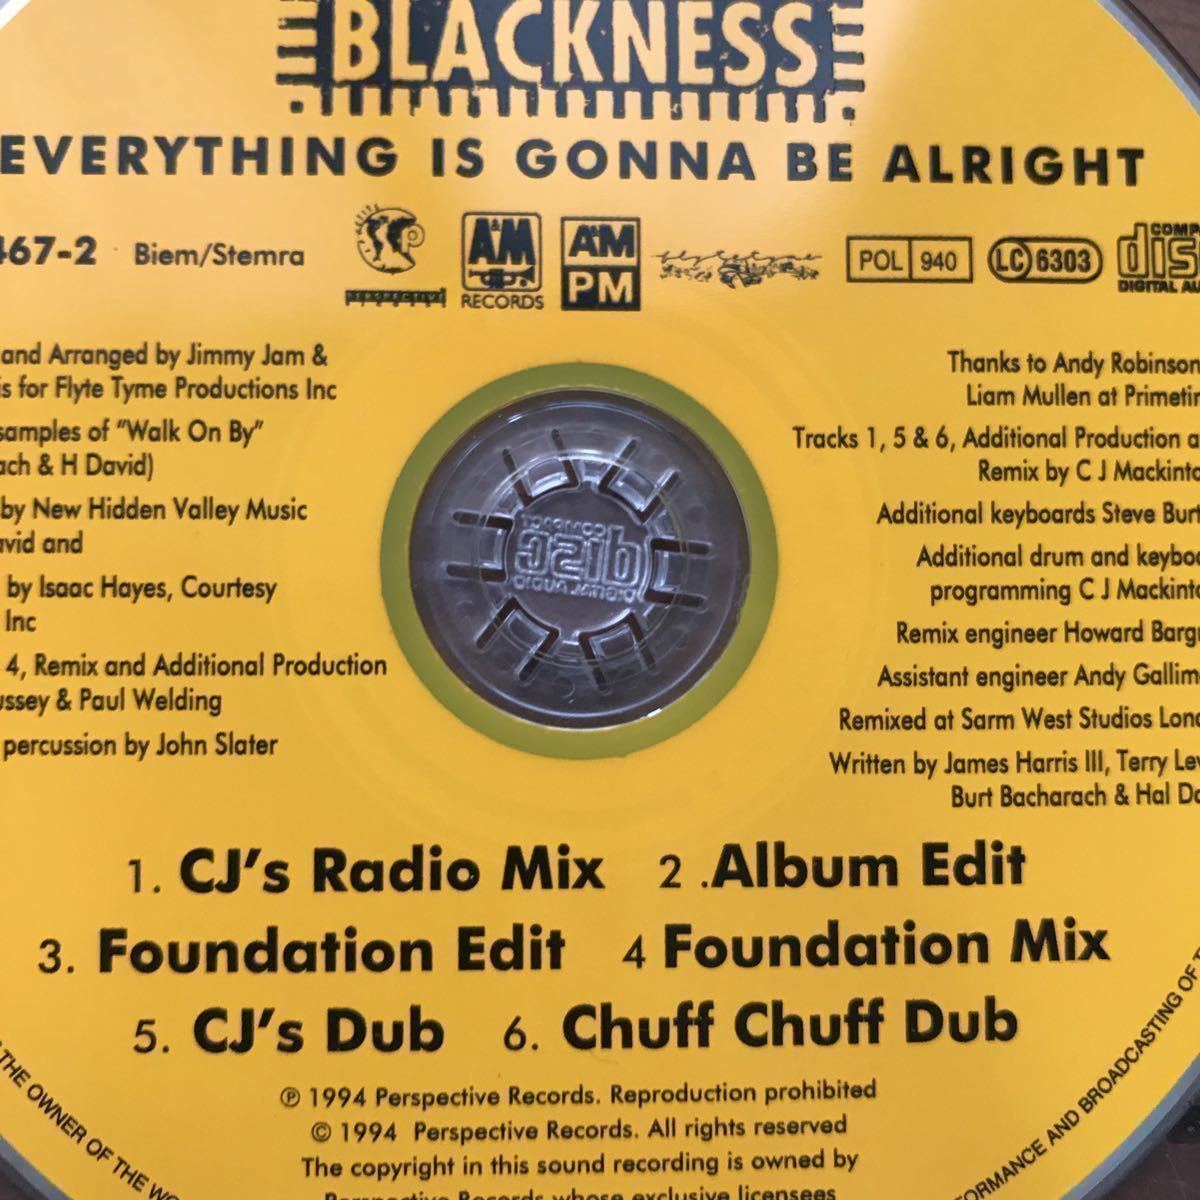 【r&b house】Sounds Of Blackness / Everything Is Gonna Be Alright［CDs］《5b043 9595》_画像4